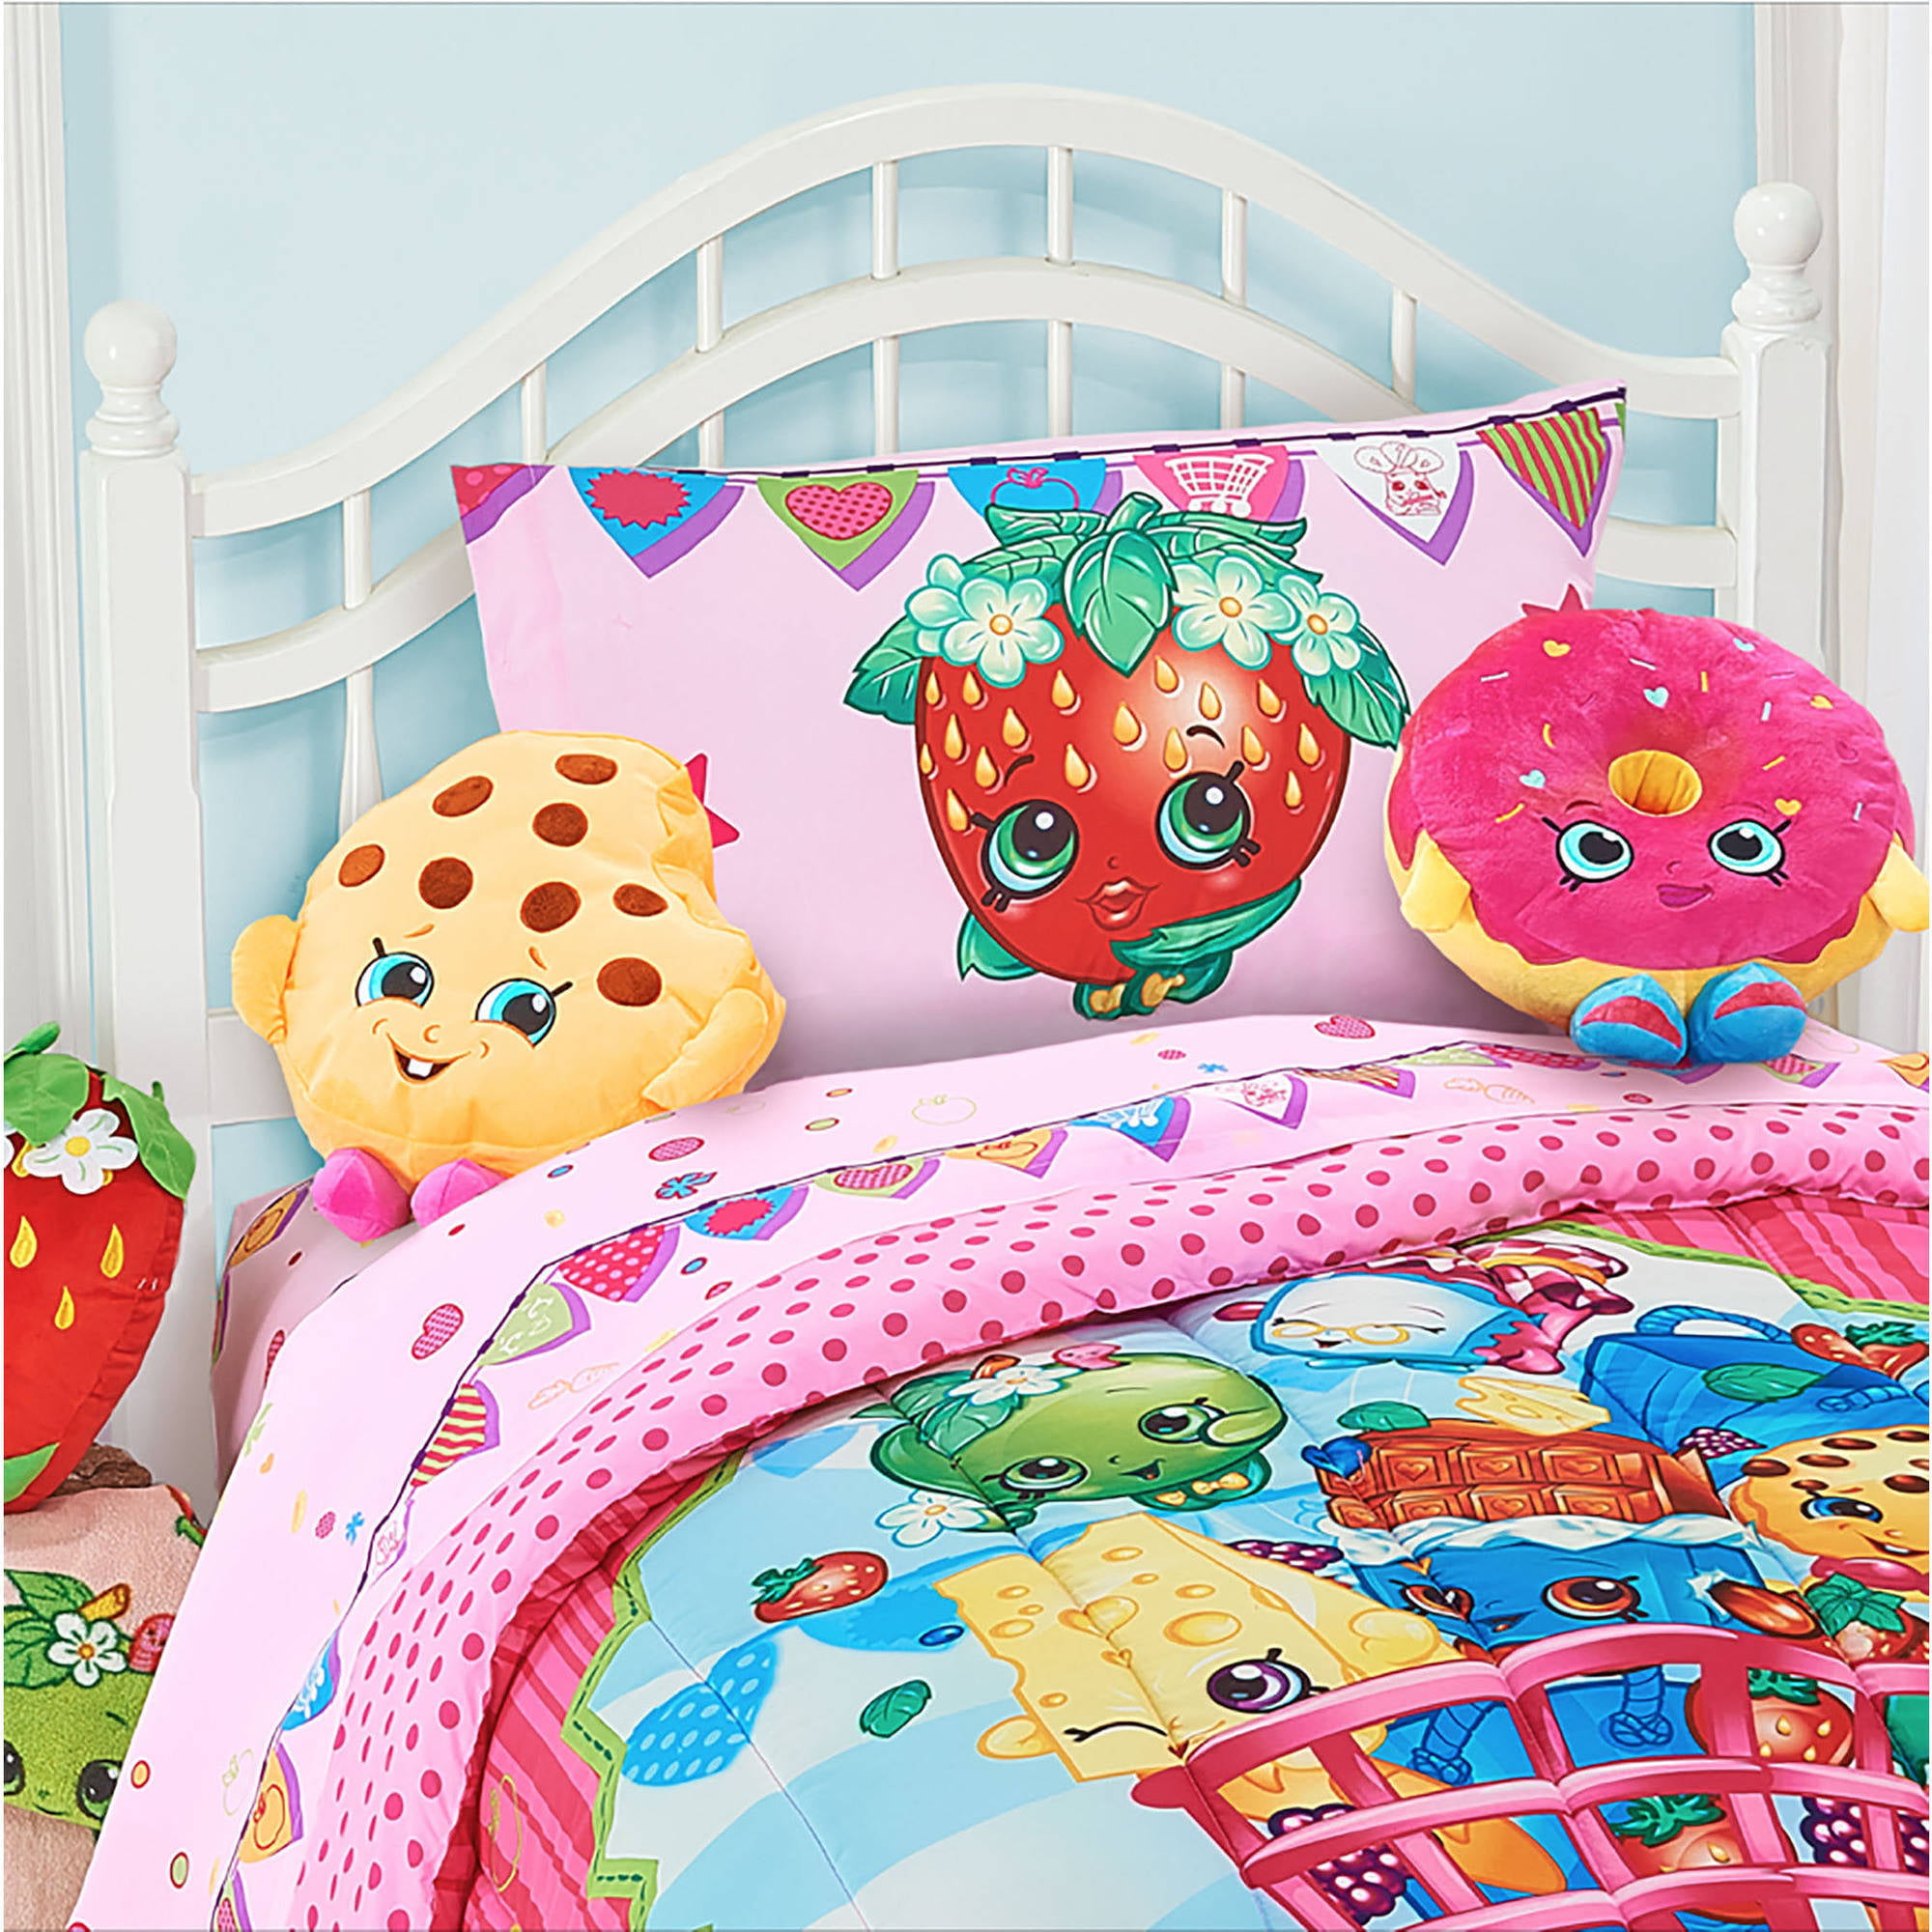 Shopkins Twin Size Sheet Set Girl's Bedroom Bedding Bed Sheets NEW RARE! 